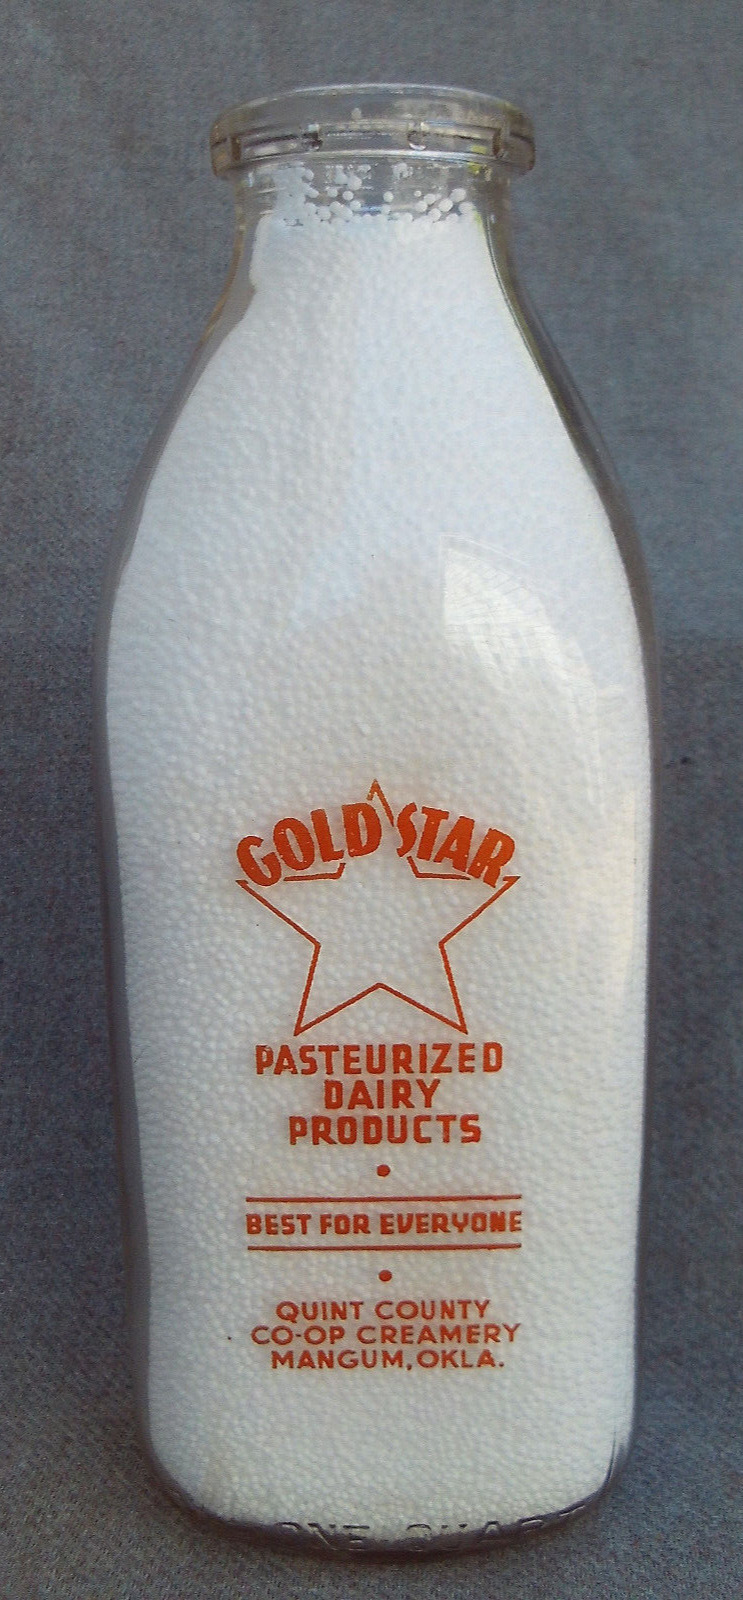 VTG 1948 GOLD STAR QUINT COUNTY CO-OP SSPQ ACL PYRO MILK BOTTLE MANGUM, OKLAHOMA